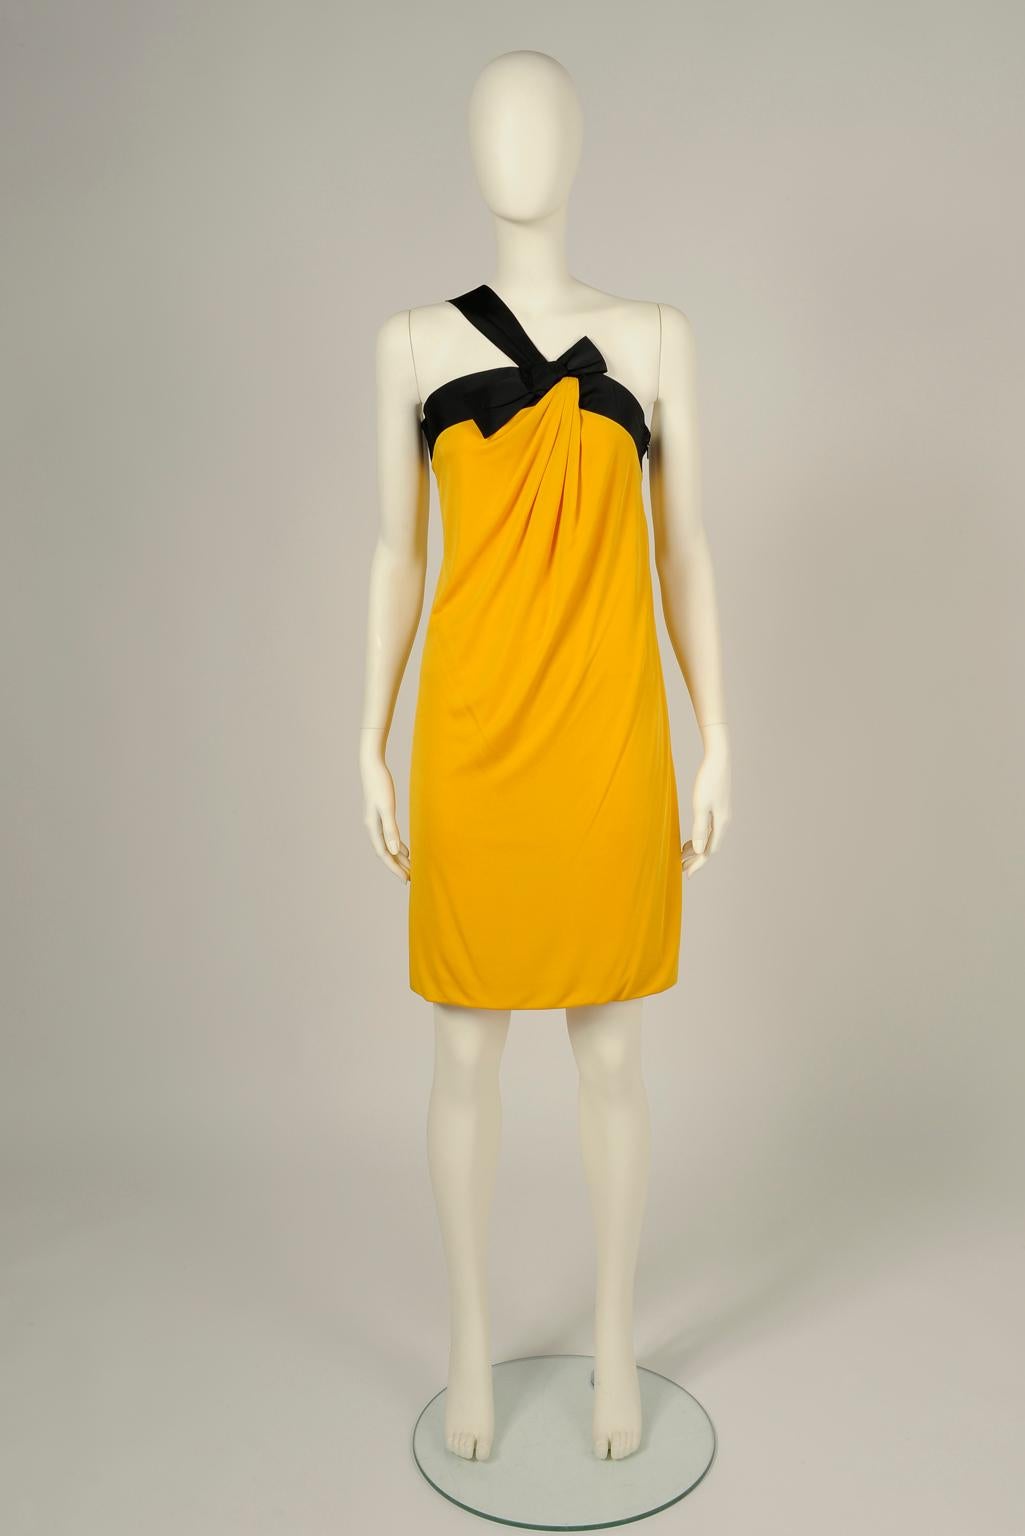 In a vibrant sunny yellow shade that really stands out, this Gucci cocktail dress is made from a double layer of soft silk jersey artfully draped, folded like an envelope, which comfortably hugs your frame. Contrasted black taffeta sweeping